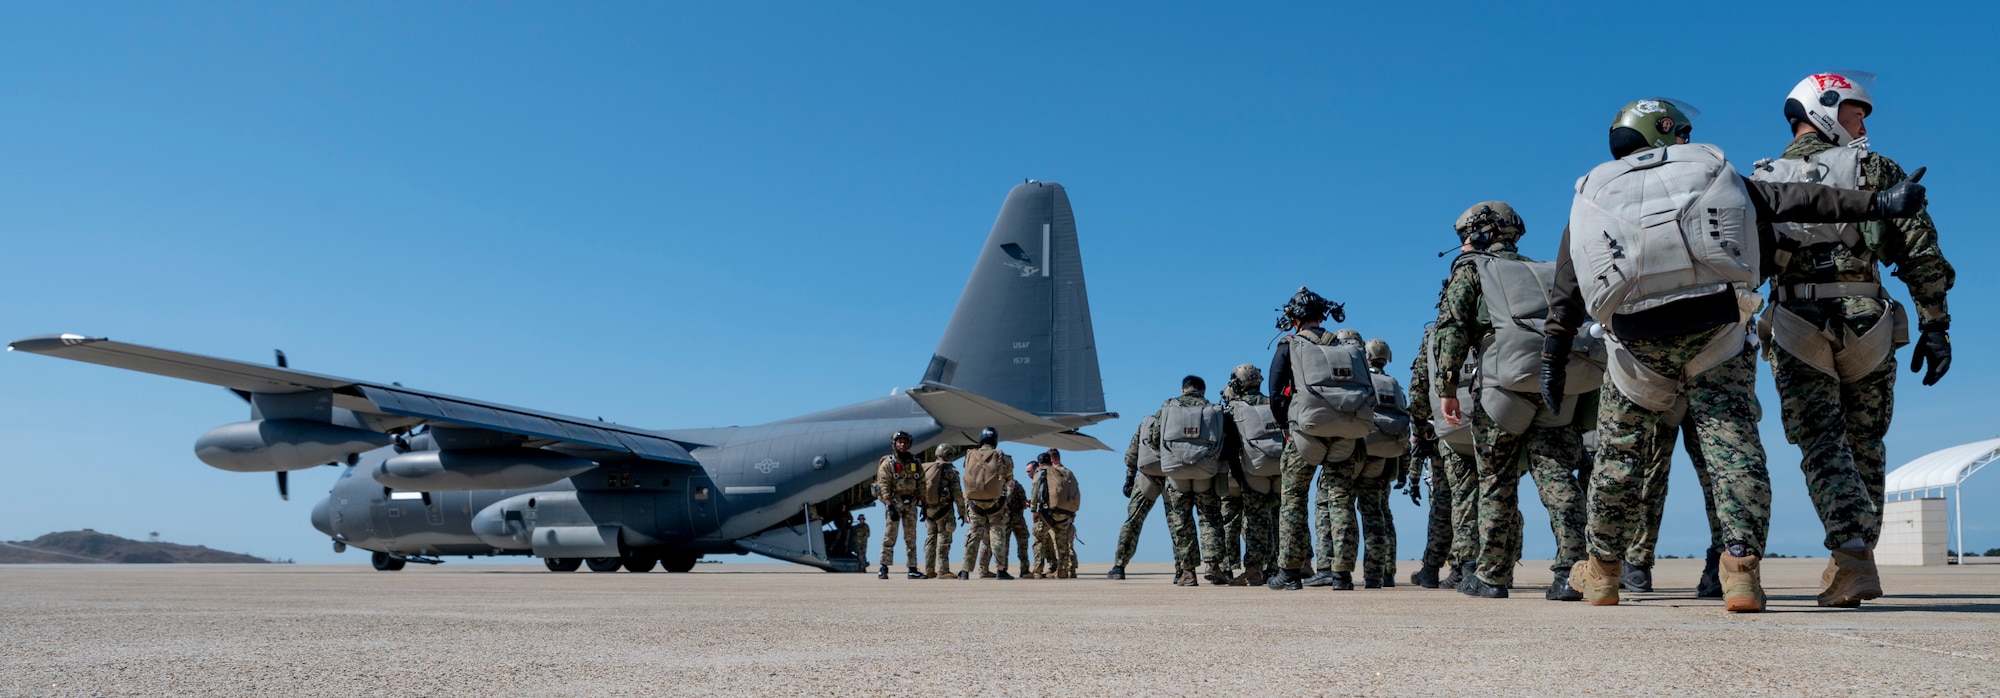 U.S. Army and Republic of Korea Soldiers begin boarding an MC-130J Commando II to conduct High Altitude Low Opening (HALO) jump training in support of Freedom Shield 23 at Kunsan Air Base, Republic of Korea, Mar. 15, 2023